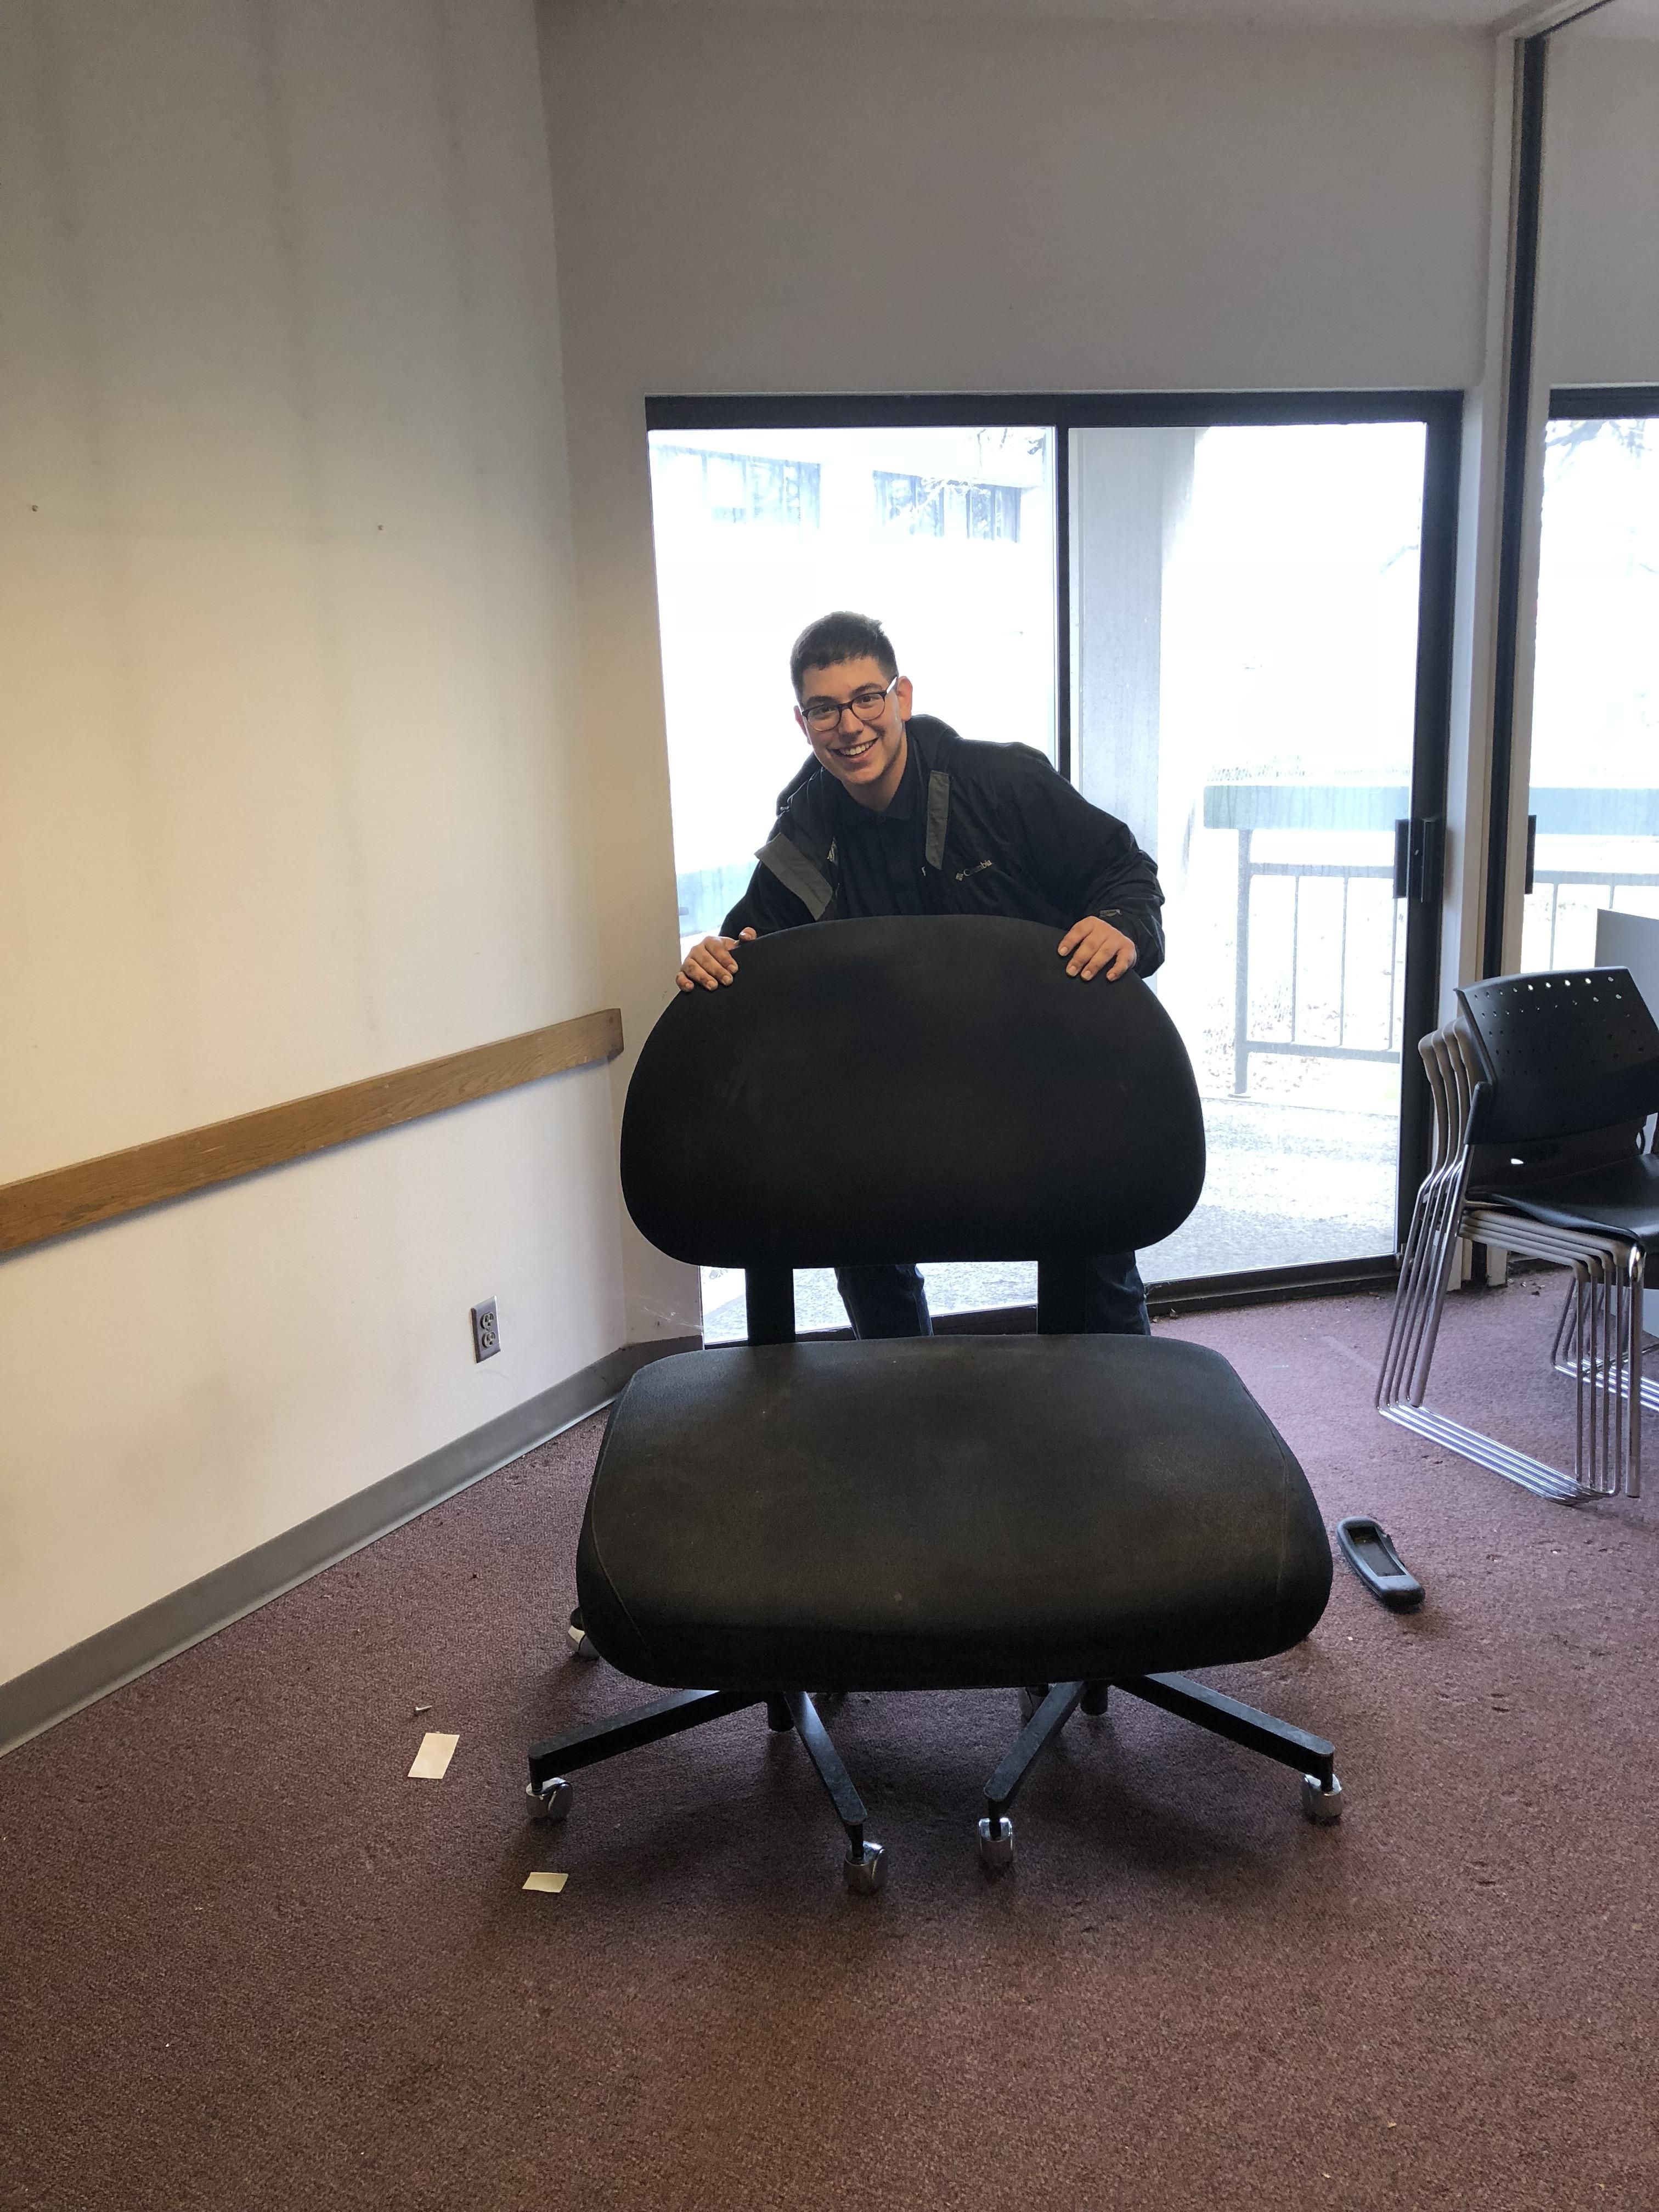 I found a ridiculously large chair at work today